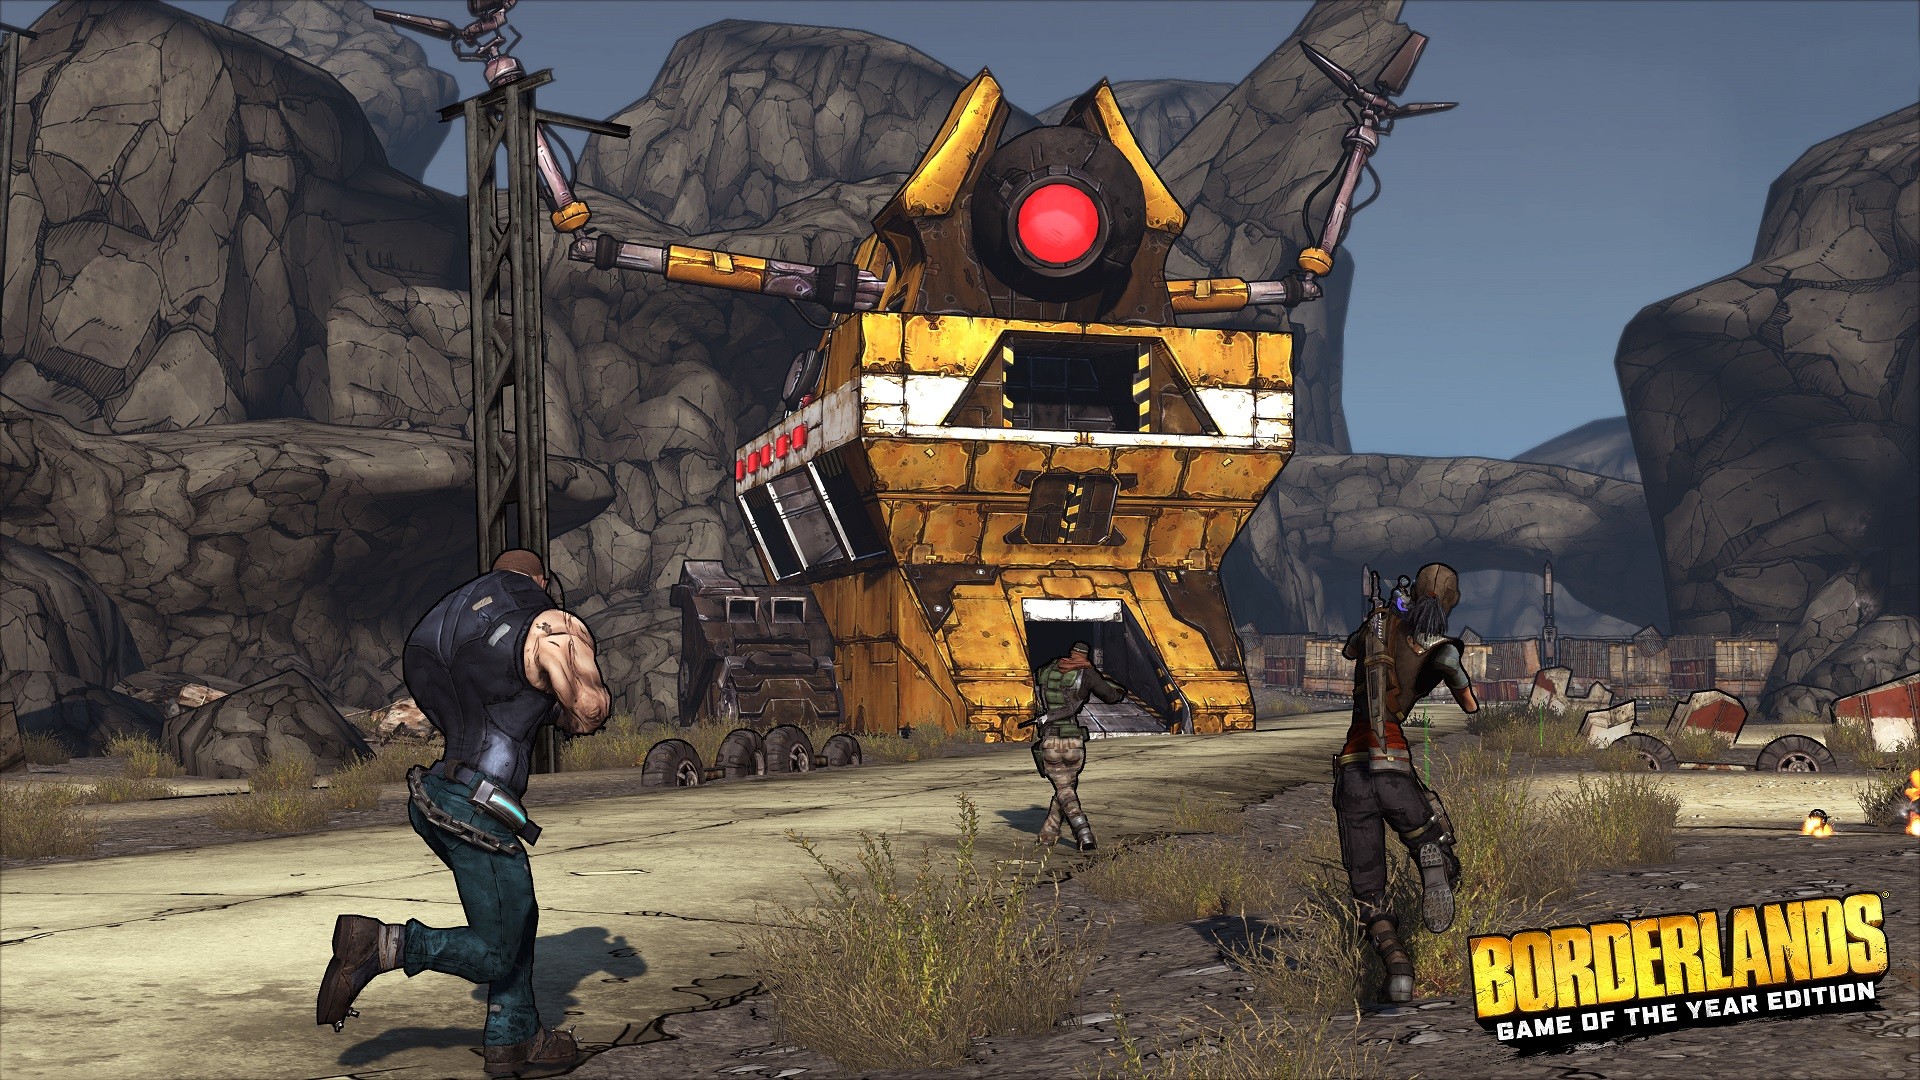 GOTY DLC tokens - Borderlands: Game of the Year Edition